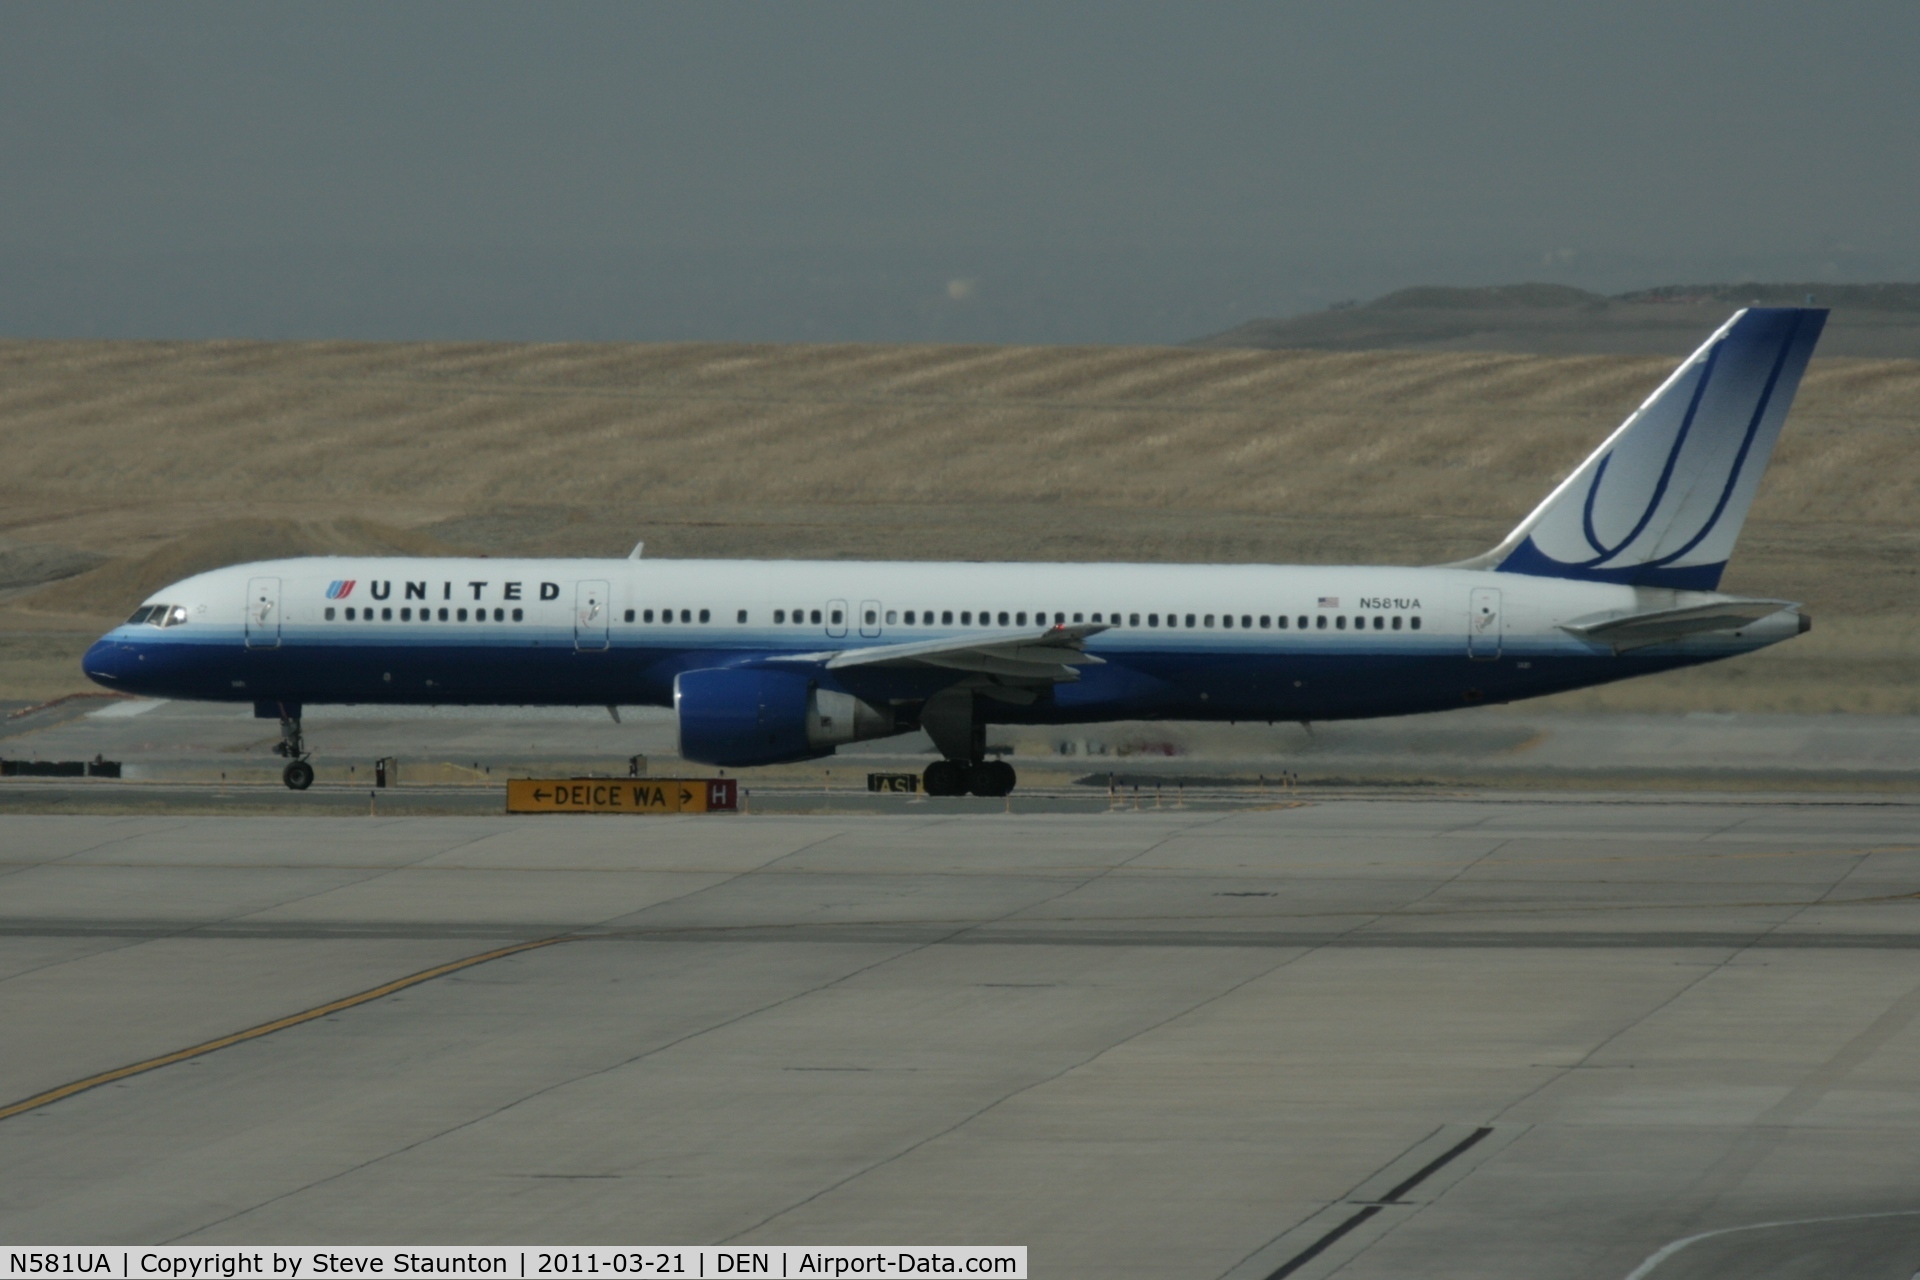 N581UA, 1993 Boeing 757-222 C/N 26701, Taken at Denver International Airport, in March 2011 whilst on an Aeroprint Aviation tour